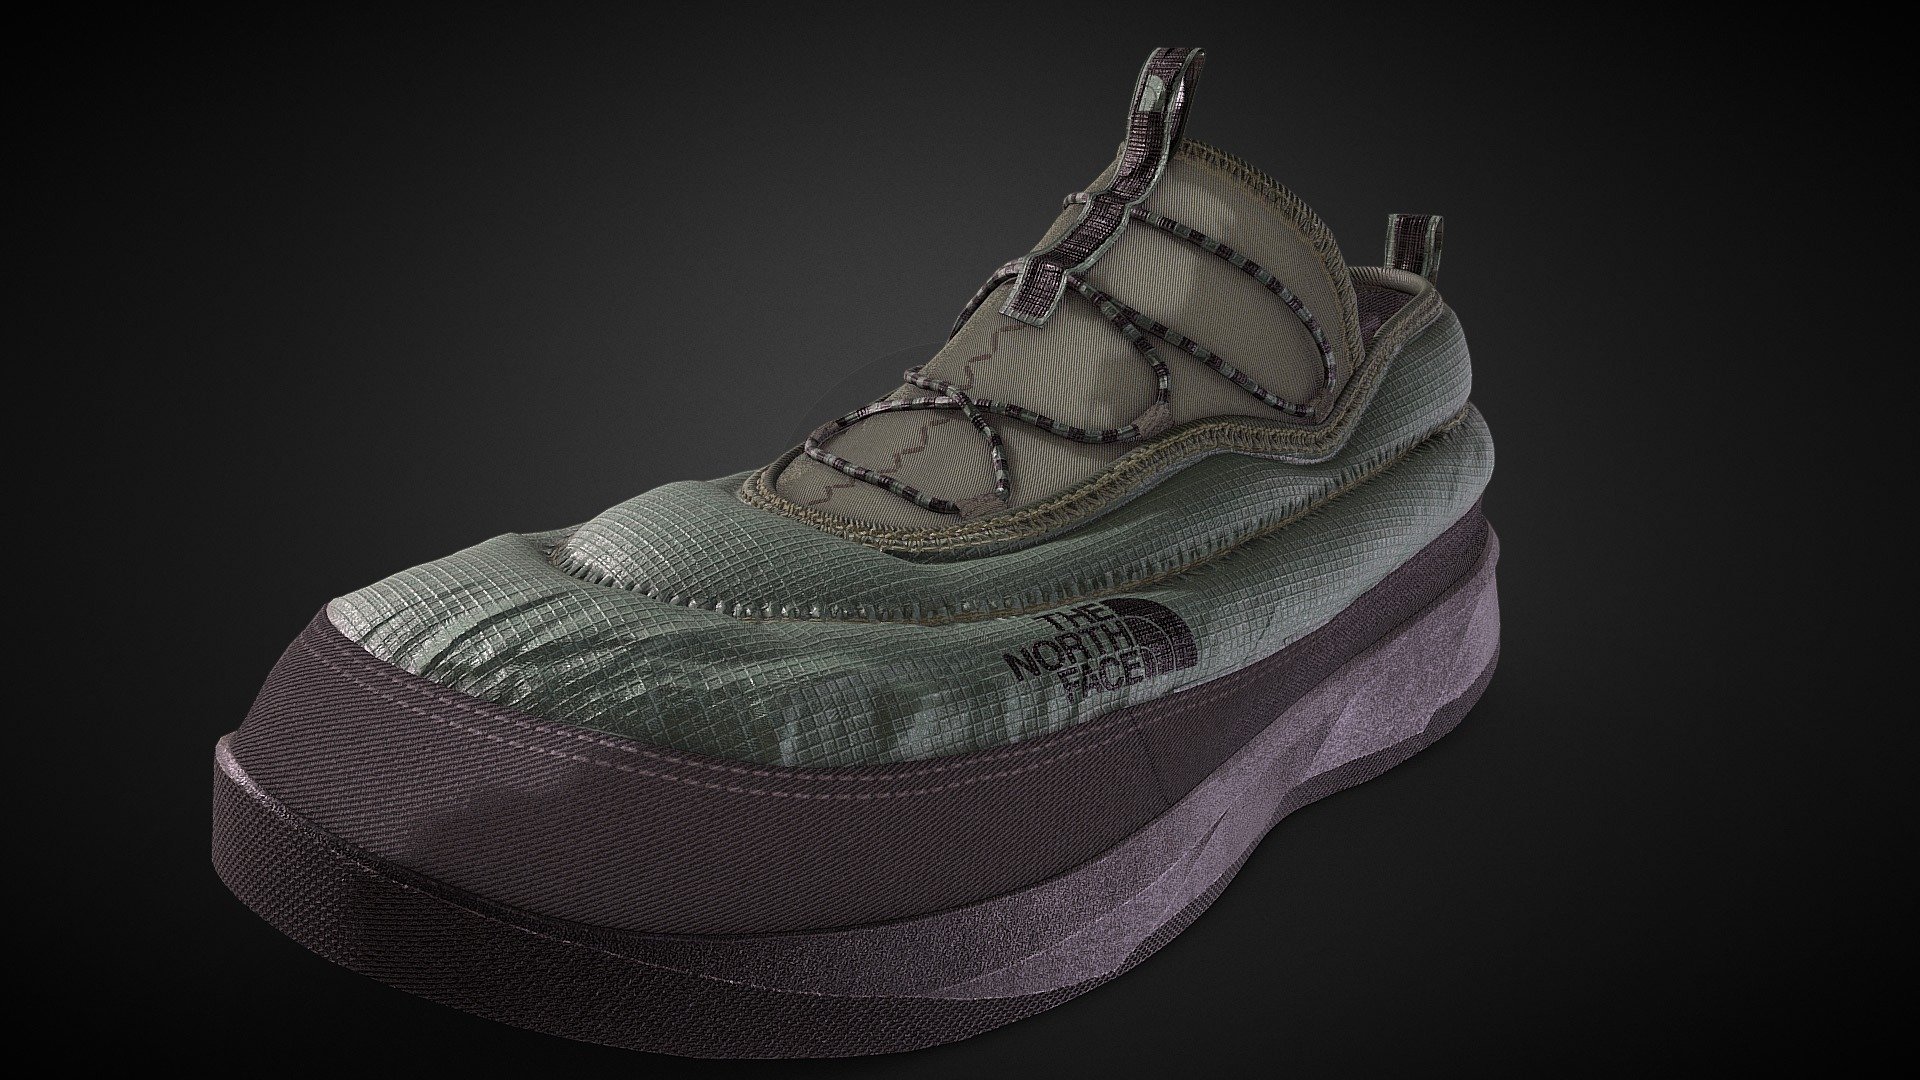 The 3D model of a THE NORTH FACE NSE LOW is a highly detailed and optimized object designed for use in various applications, including real-time rendering and game engines. It features a low-poly optimized wireframe, which allows it to be rendered quickly and efficiently in real-time applications such as games and interactive 3D applications. The THE NORTH FACE NSE LOW 3D model also includes high-quality normal maps that add depth and detail to its surfaces, making it a highly realistic and immersive asset 3d model